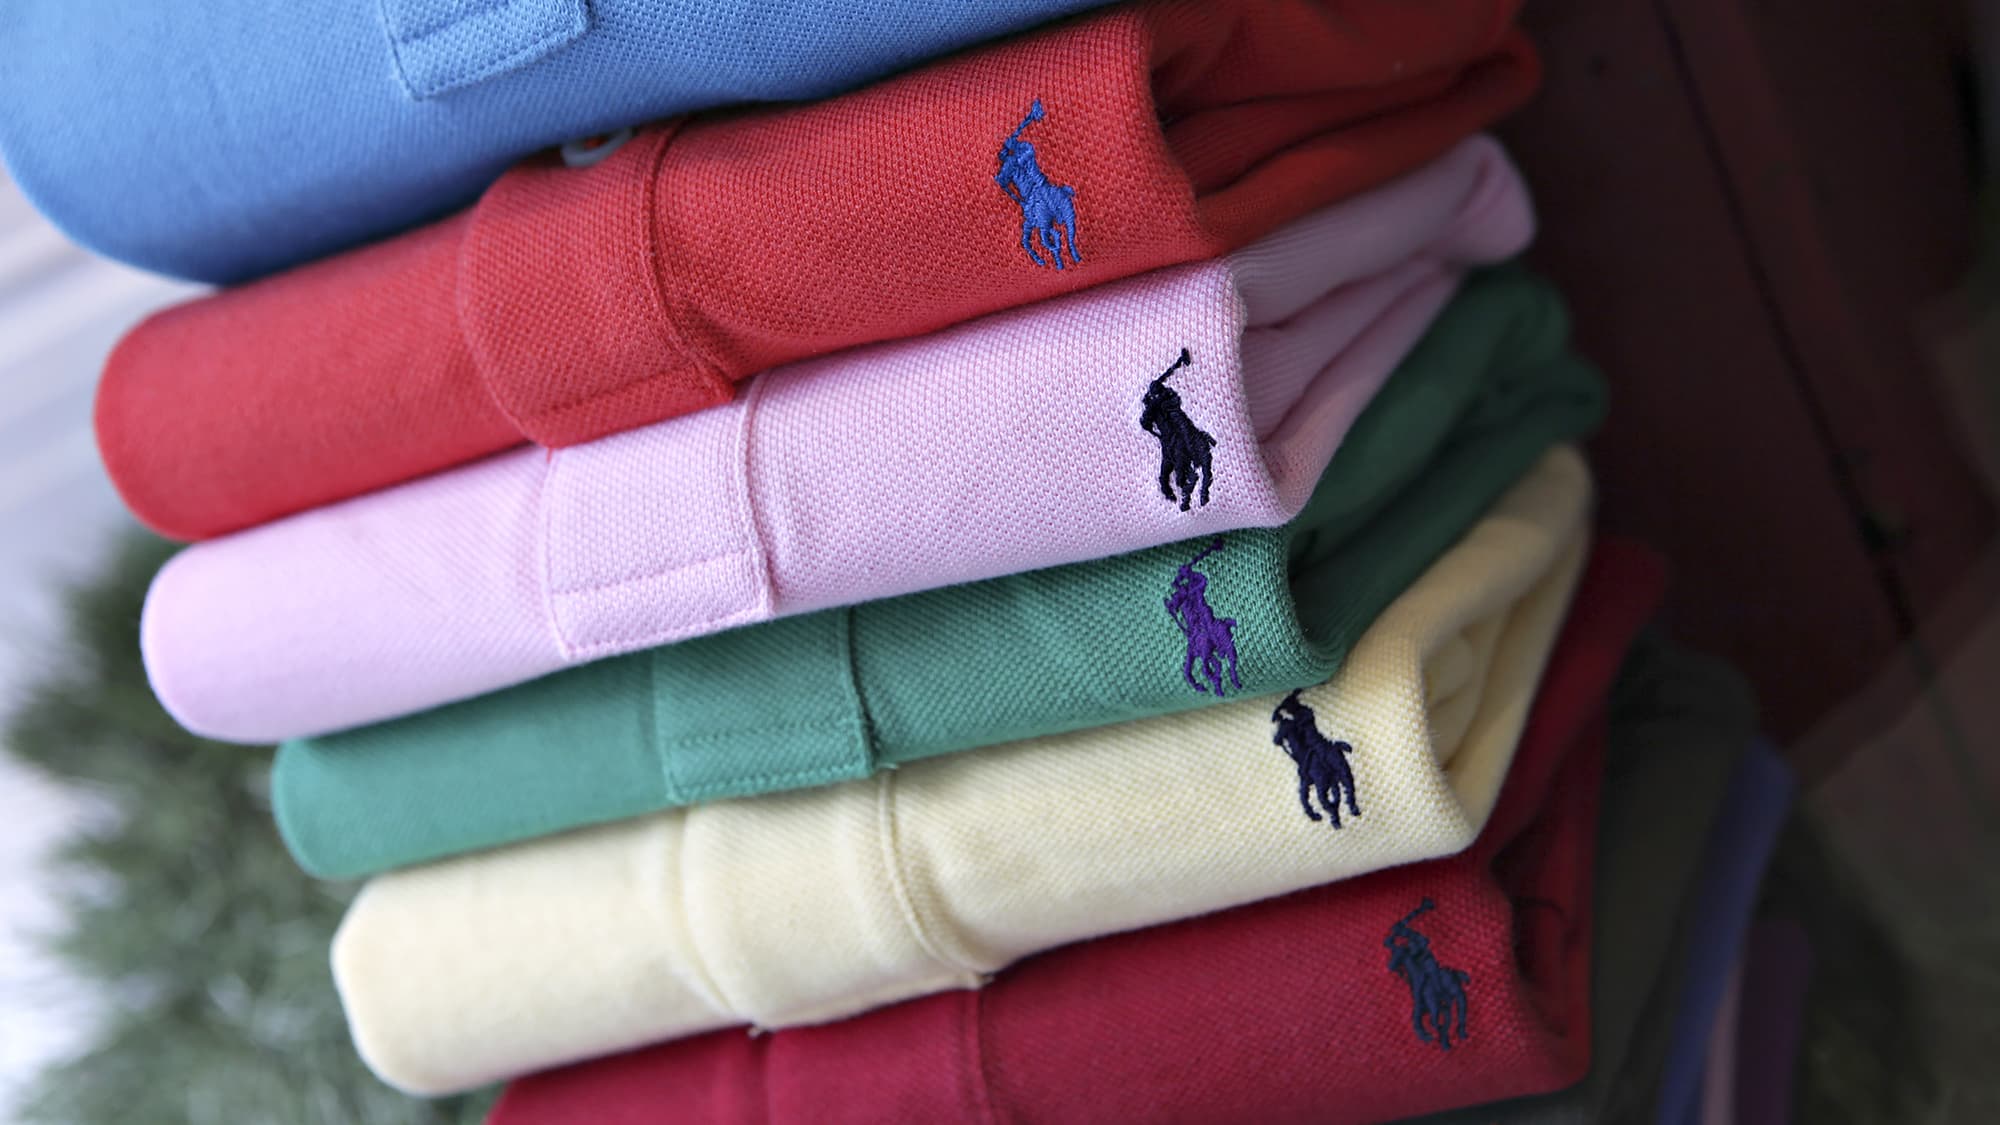 The future of Ralph Lauren's iconic polo, and retail, may be coloring your own clothes in the store